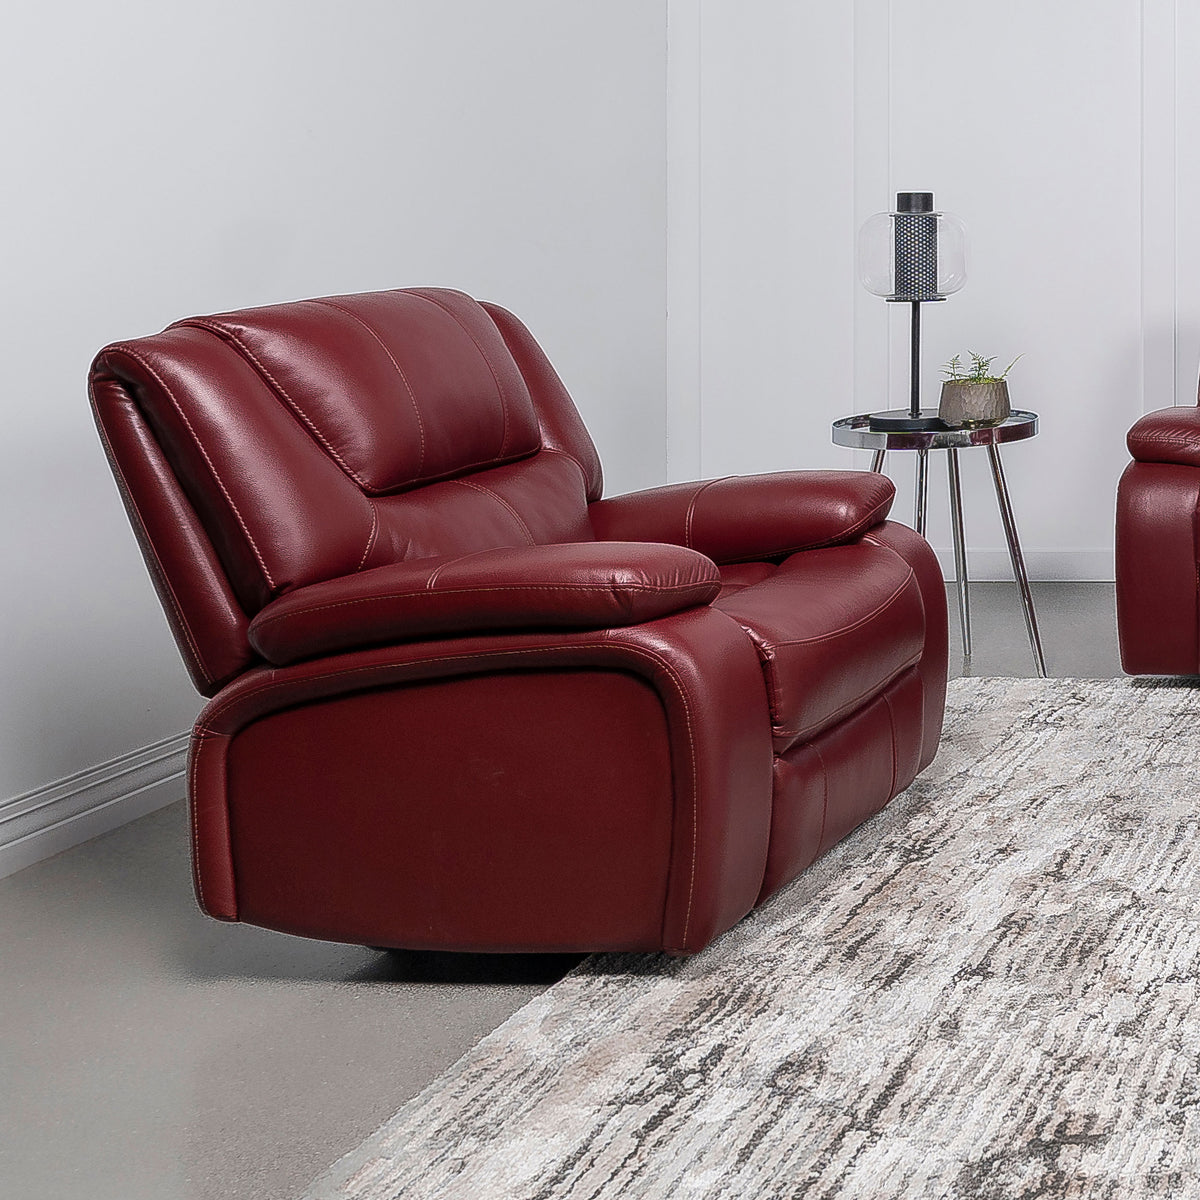 Camila Upholstered Glider Recliner Chair Red Faux Leather  Half Price Furniture